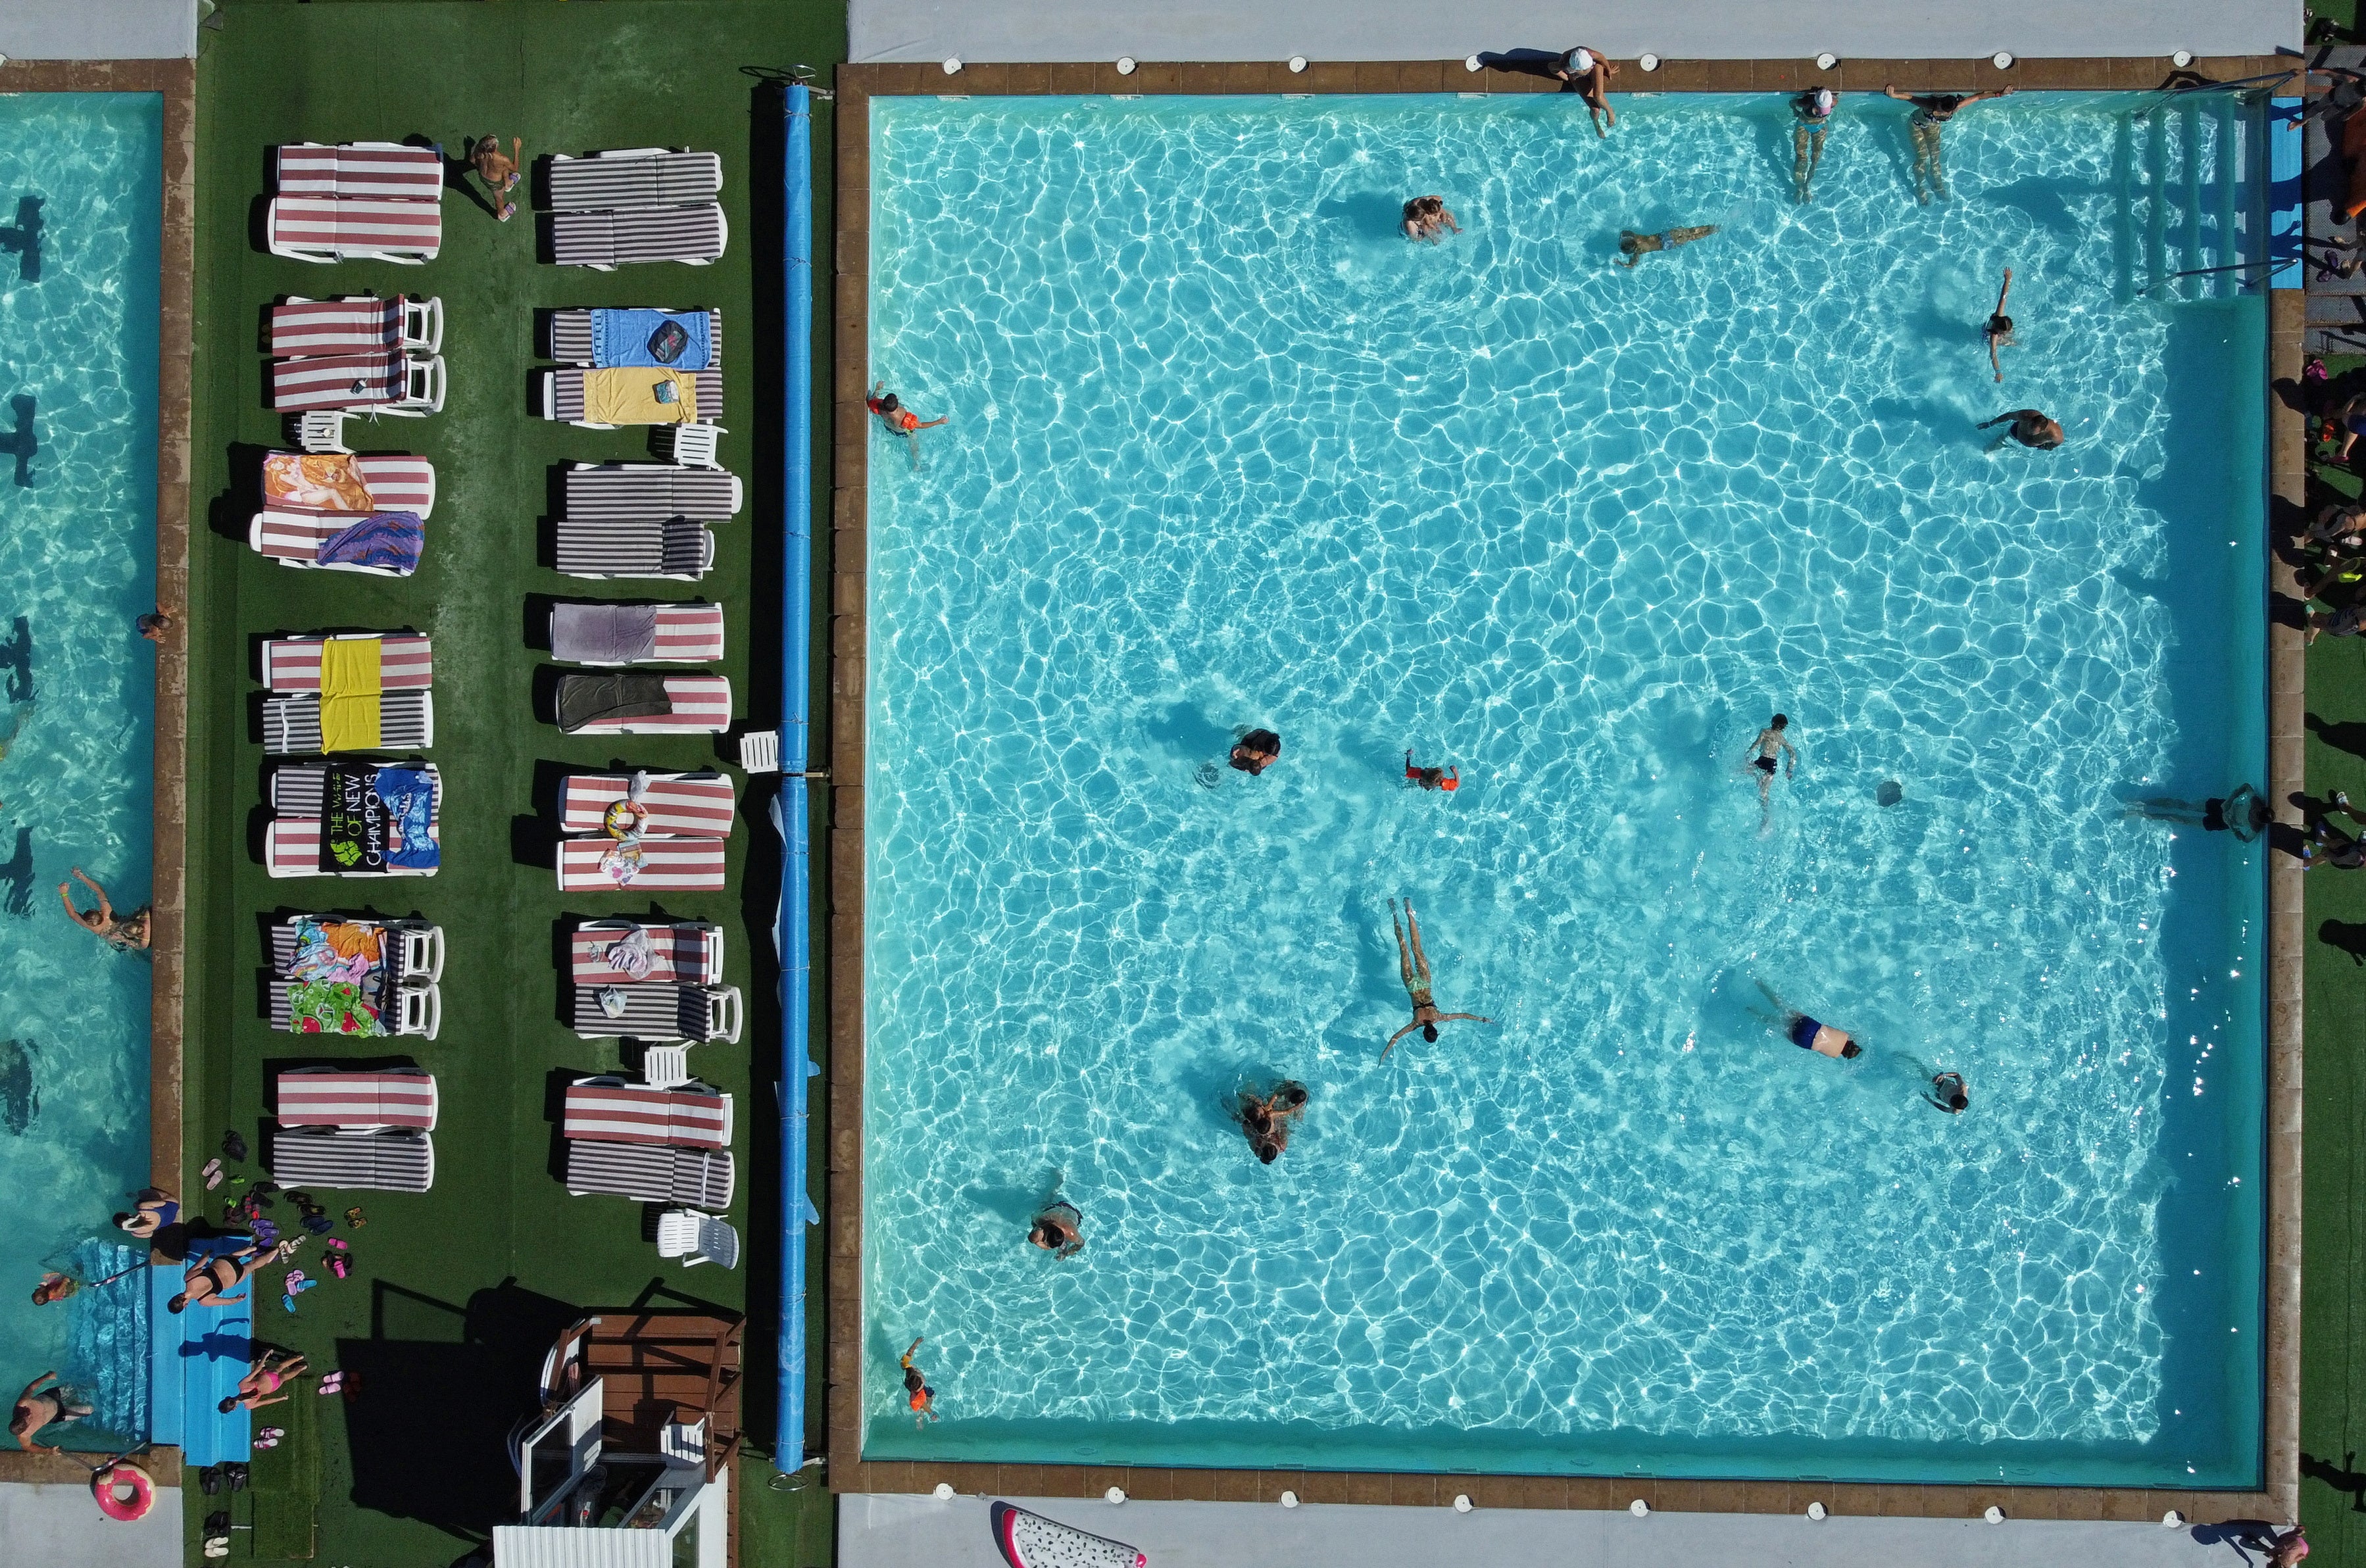 File: people relax in a swimming pool on a summer day